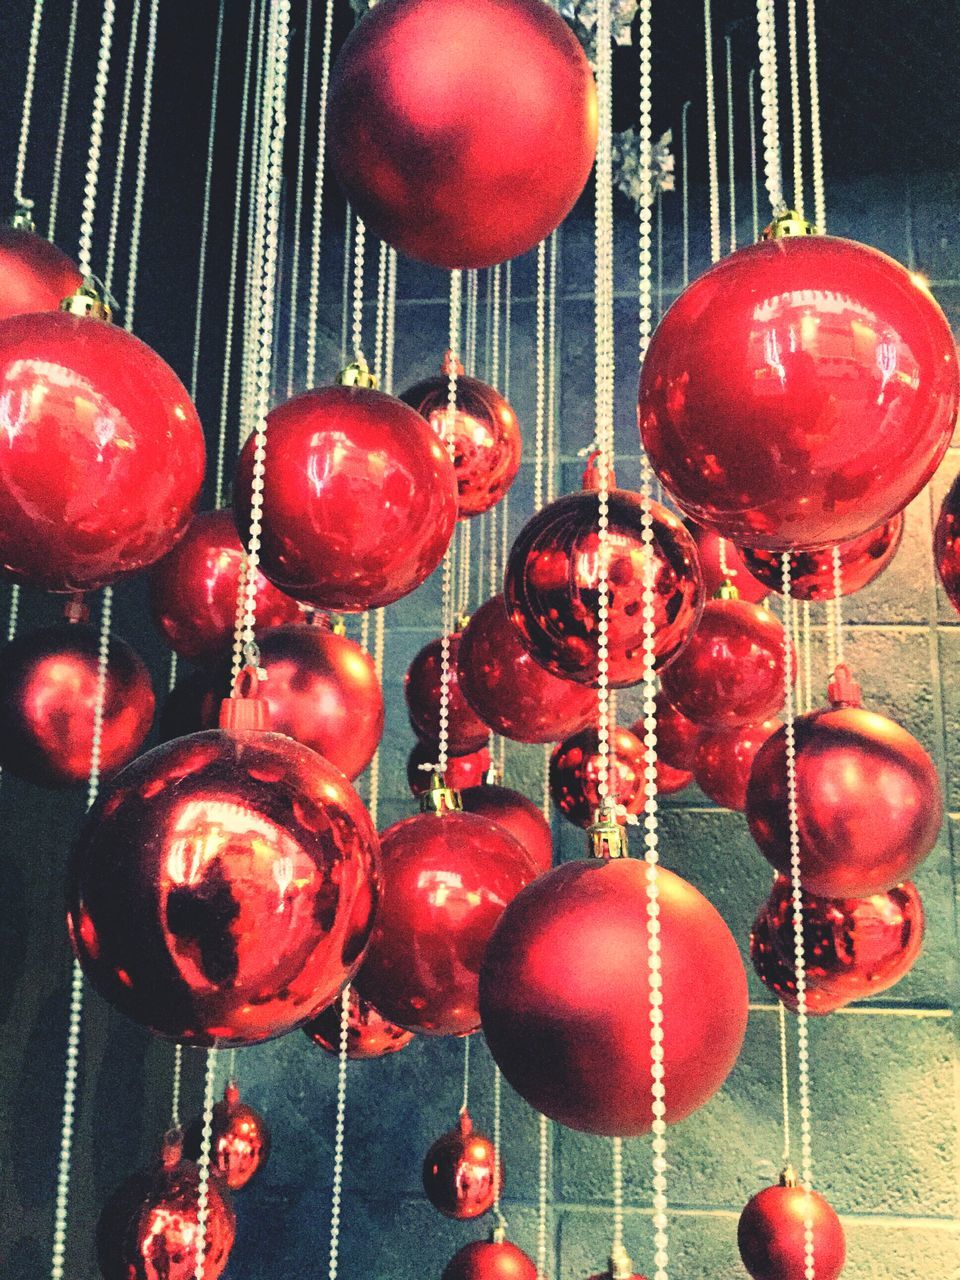 indoors, red, hanging, still life, decoration, celebration, in a row, christmas, large group of objects, close-up, variation, tradition, table, decor, lighting equipment, cultures, low angle view, illuminated, no people, lantern